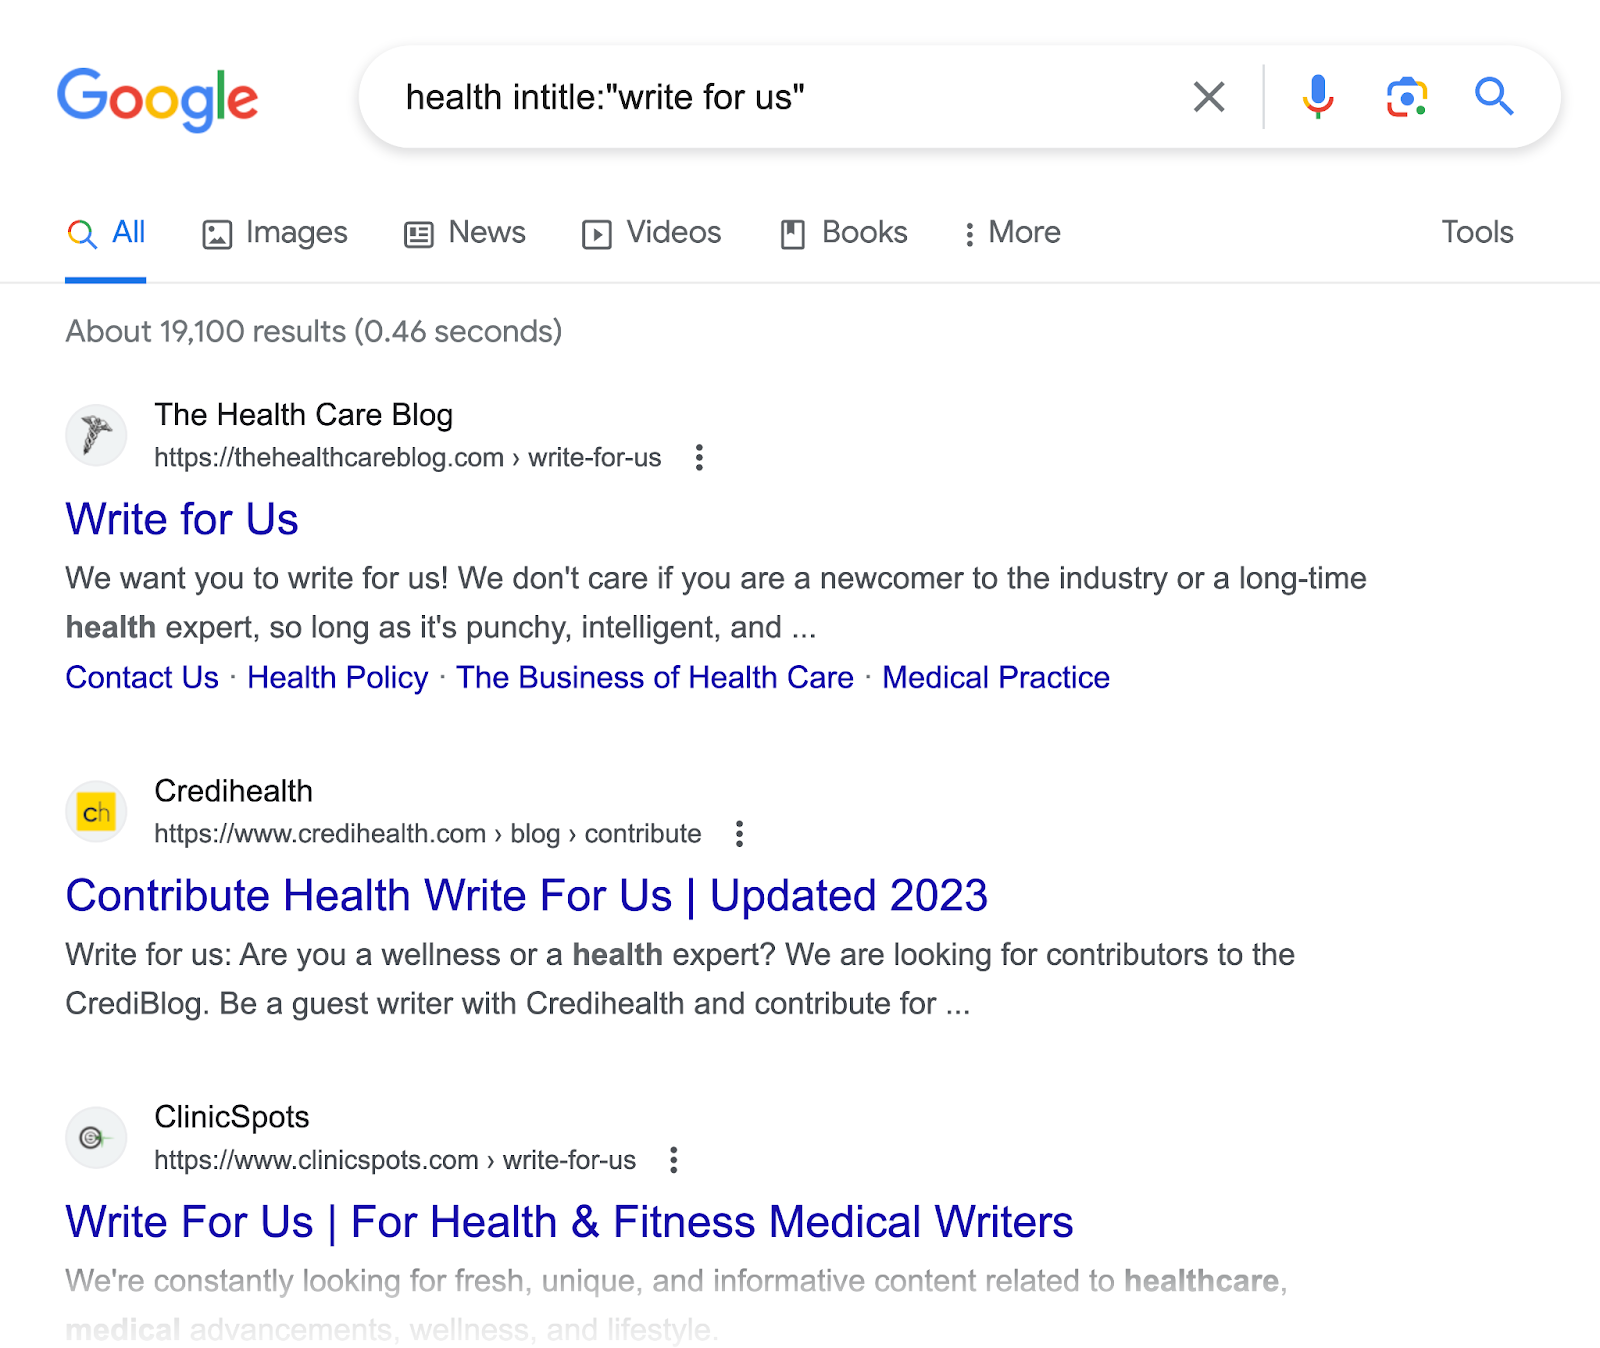 Google search results page for "healts intitle:"write for us"